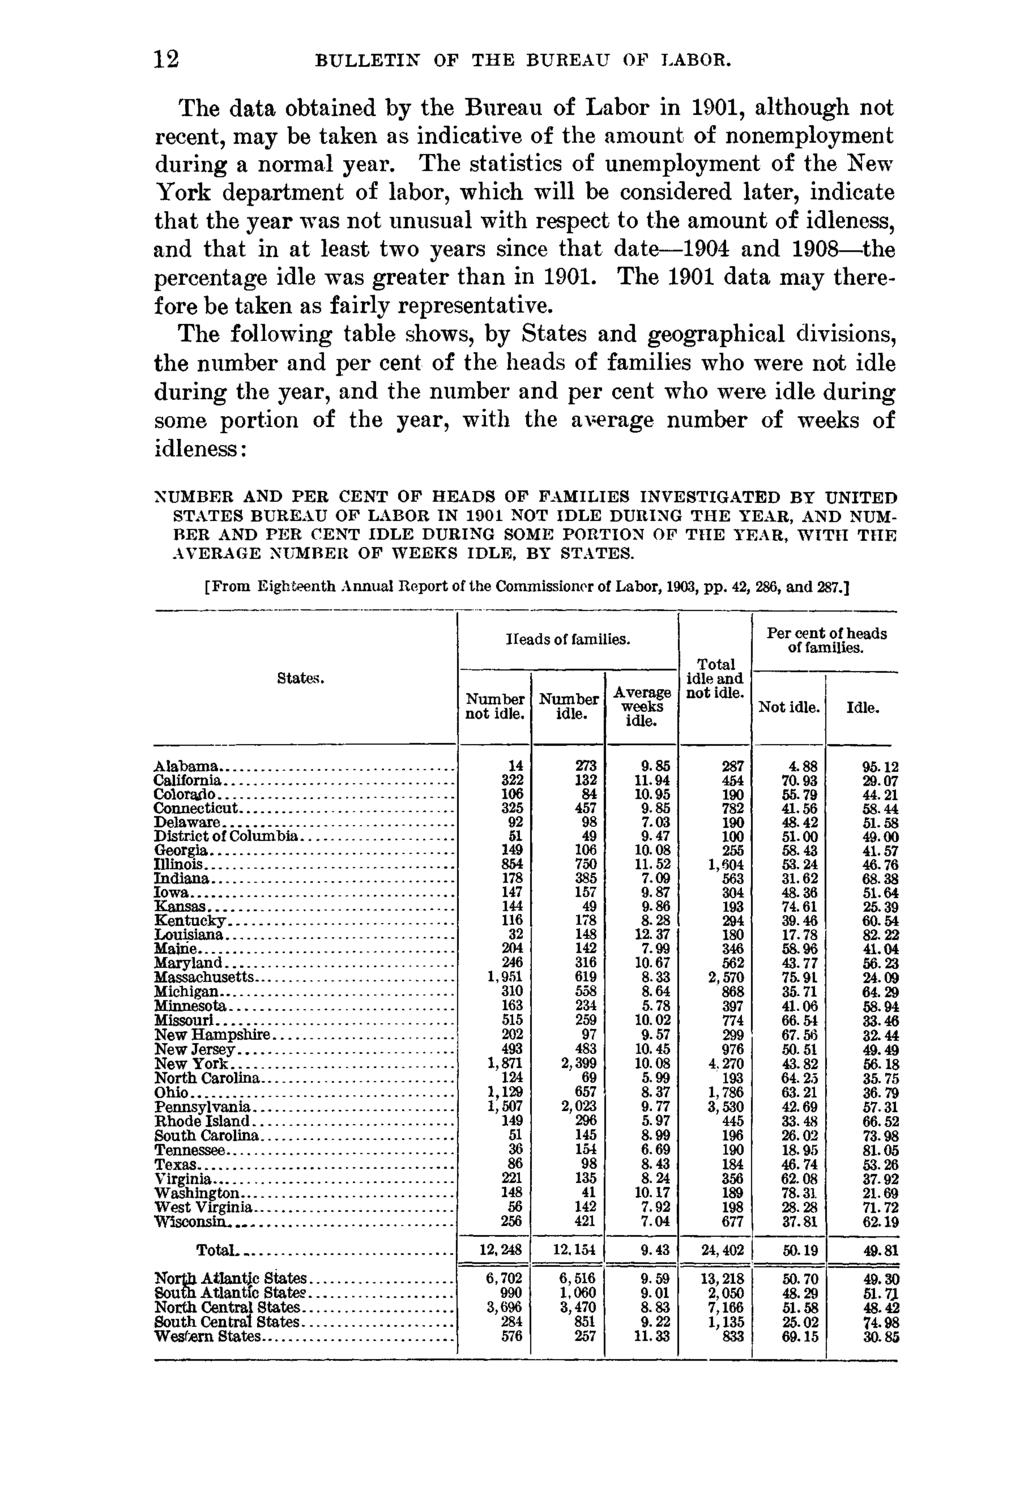 12 BULLETIN OF THE BUREAU OF LABOR. The data obtained by the Bureau of Labor in 1901, although not recent, may be taken as indicative of the amount of nonemployment during a normal year.